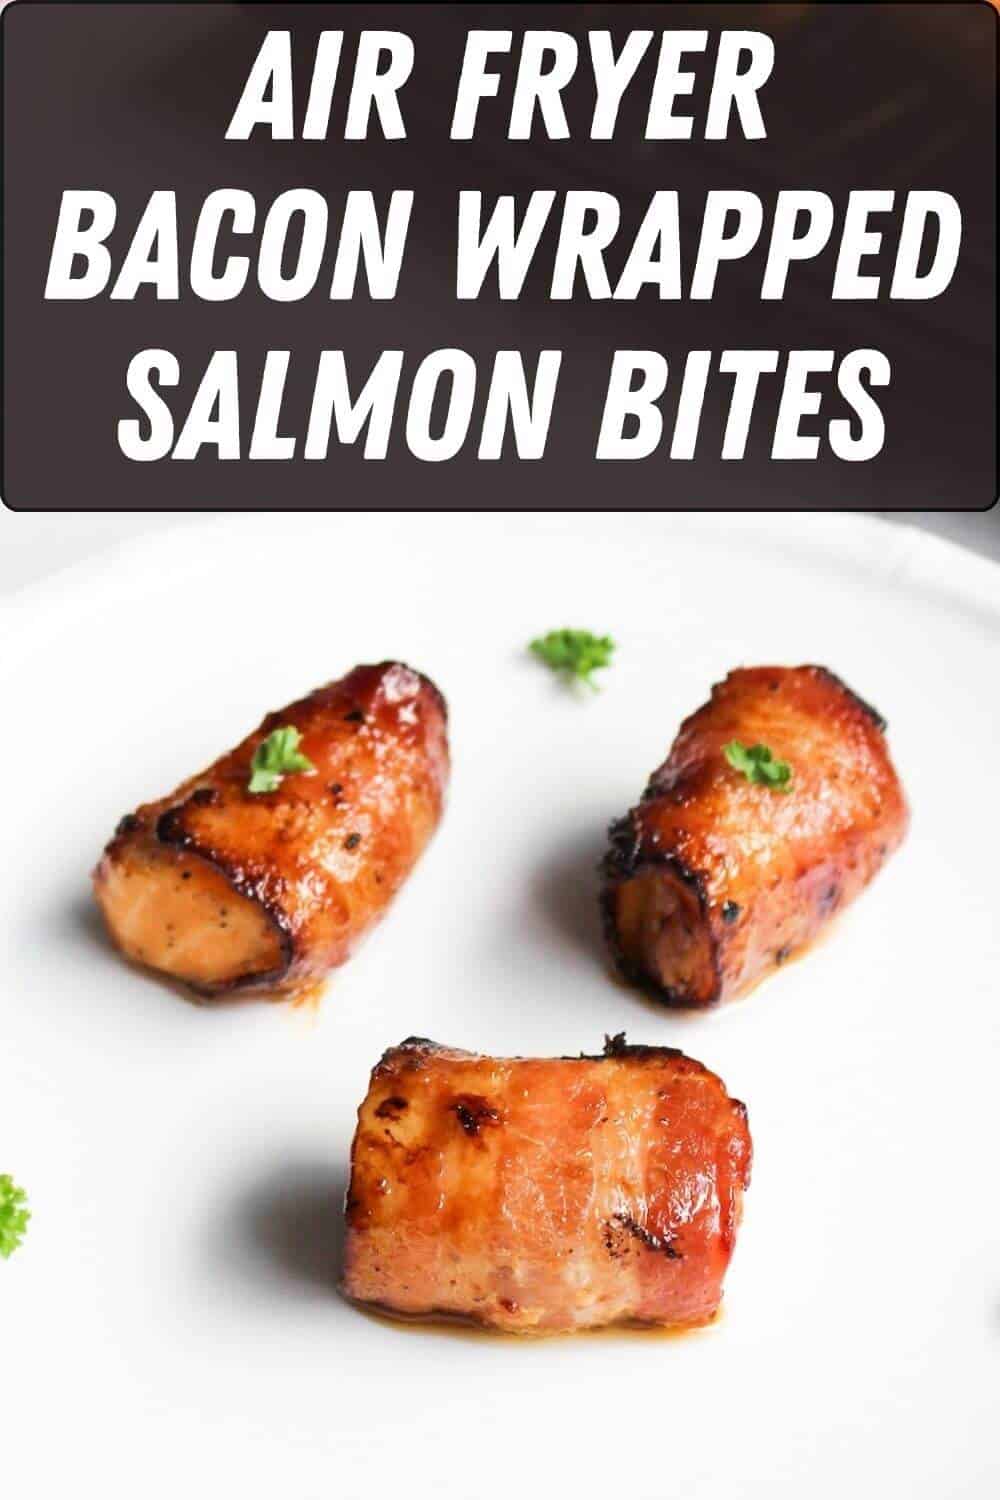 Air fryer bacon wrapped salmon bites is a delicious dish that combines the tenderness of salmon with the smoky flavor of bacon. The air fryer method ensures crispy bacon and perfectly cooked salmon.